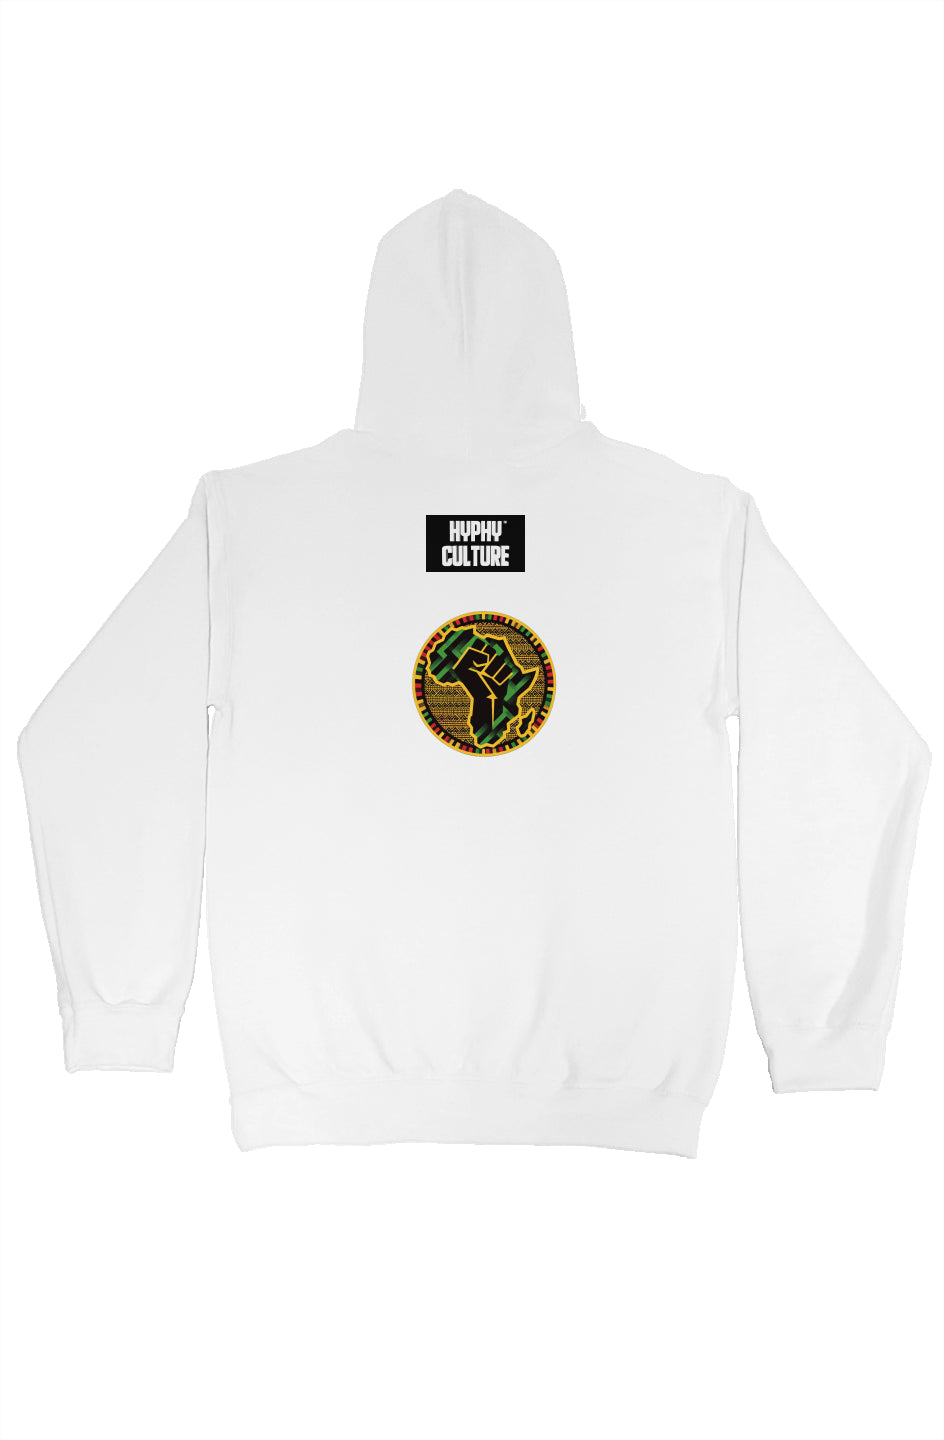 HYPHY CULTURE BHM pullover hoody